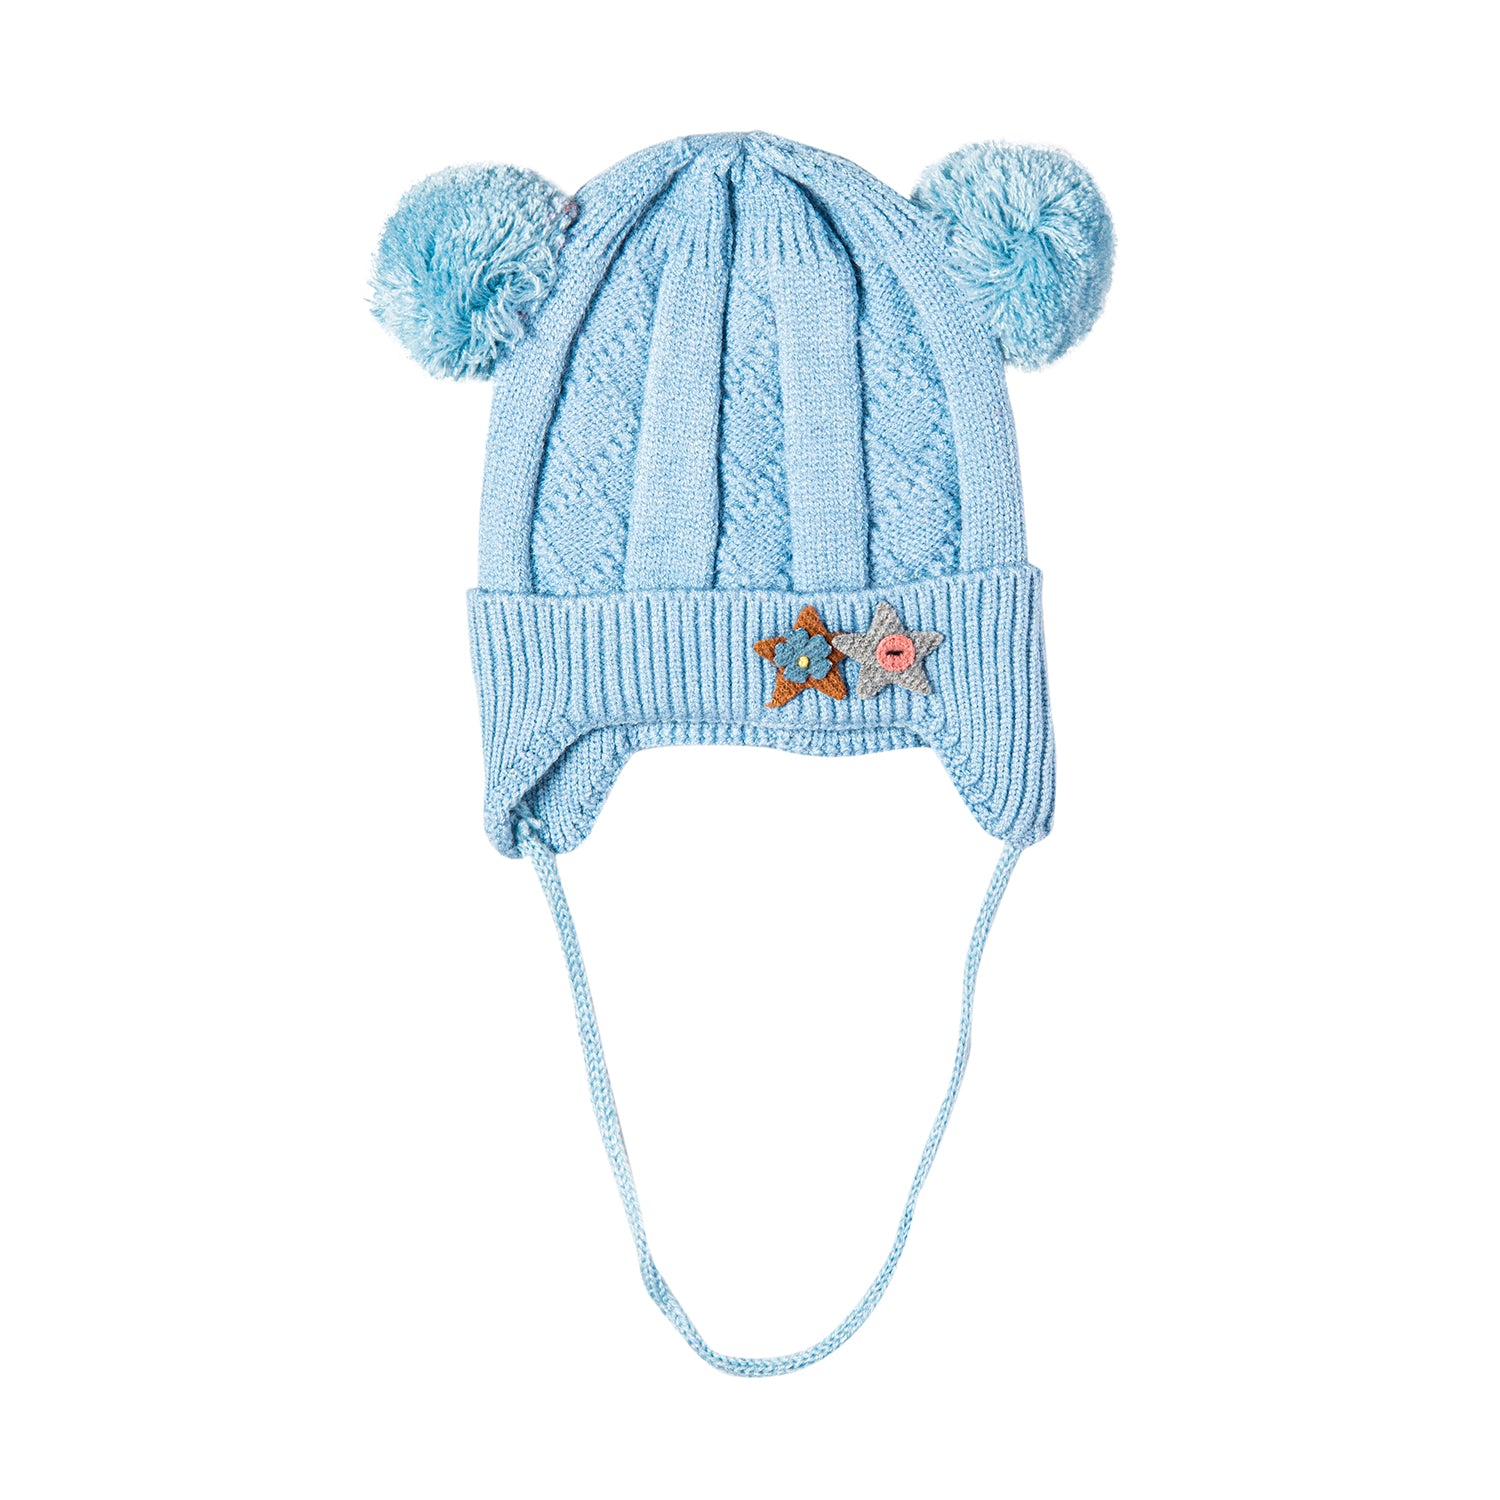 Baby Moo Knit Woollen Cap With Tie For Ear Cover Starry Pom Pom Blue